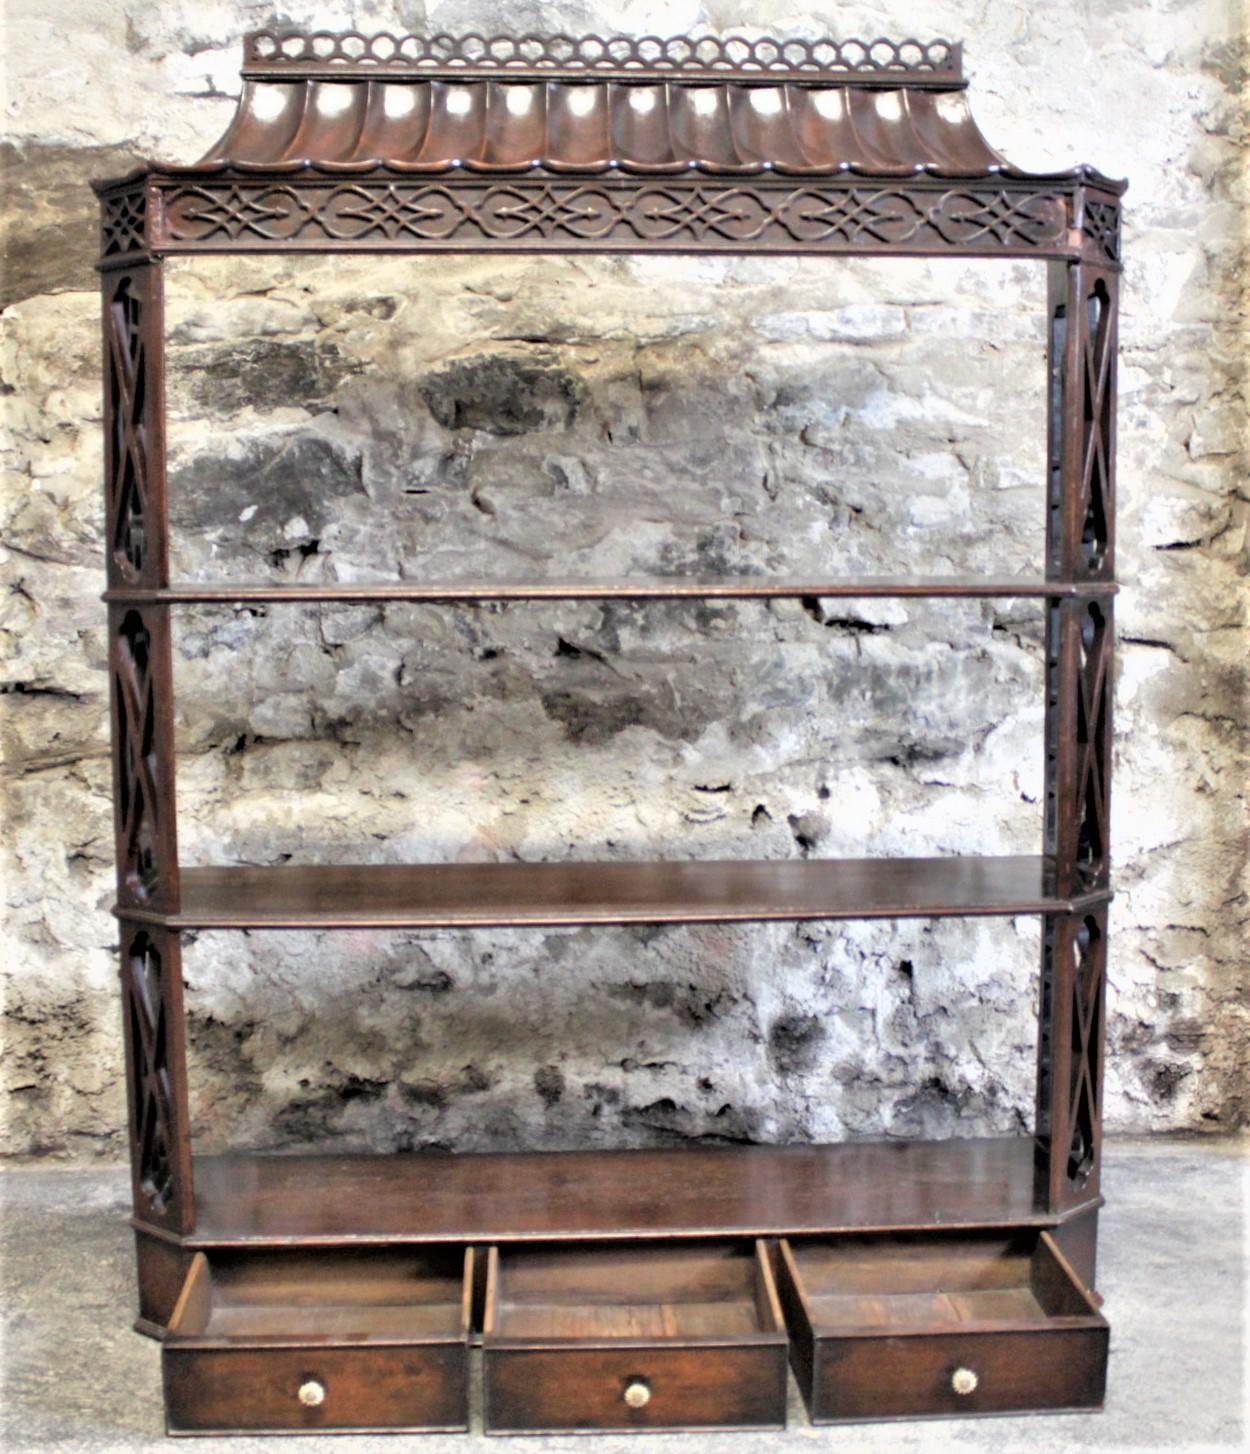 Hand-Crafted Antique Wooden Chinese Chippendale Wall Shelf or Hanging Bookshelf with Drawers